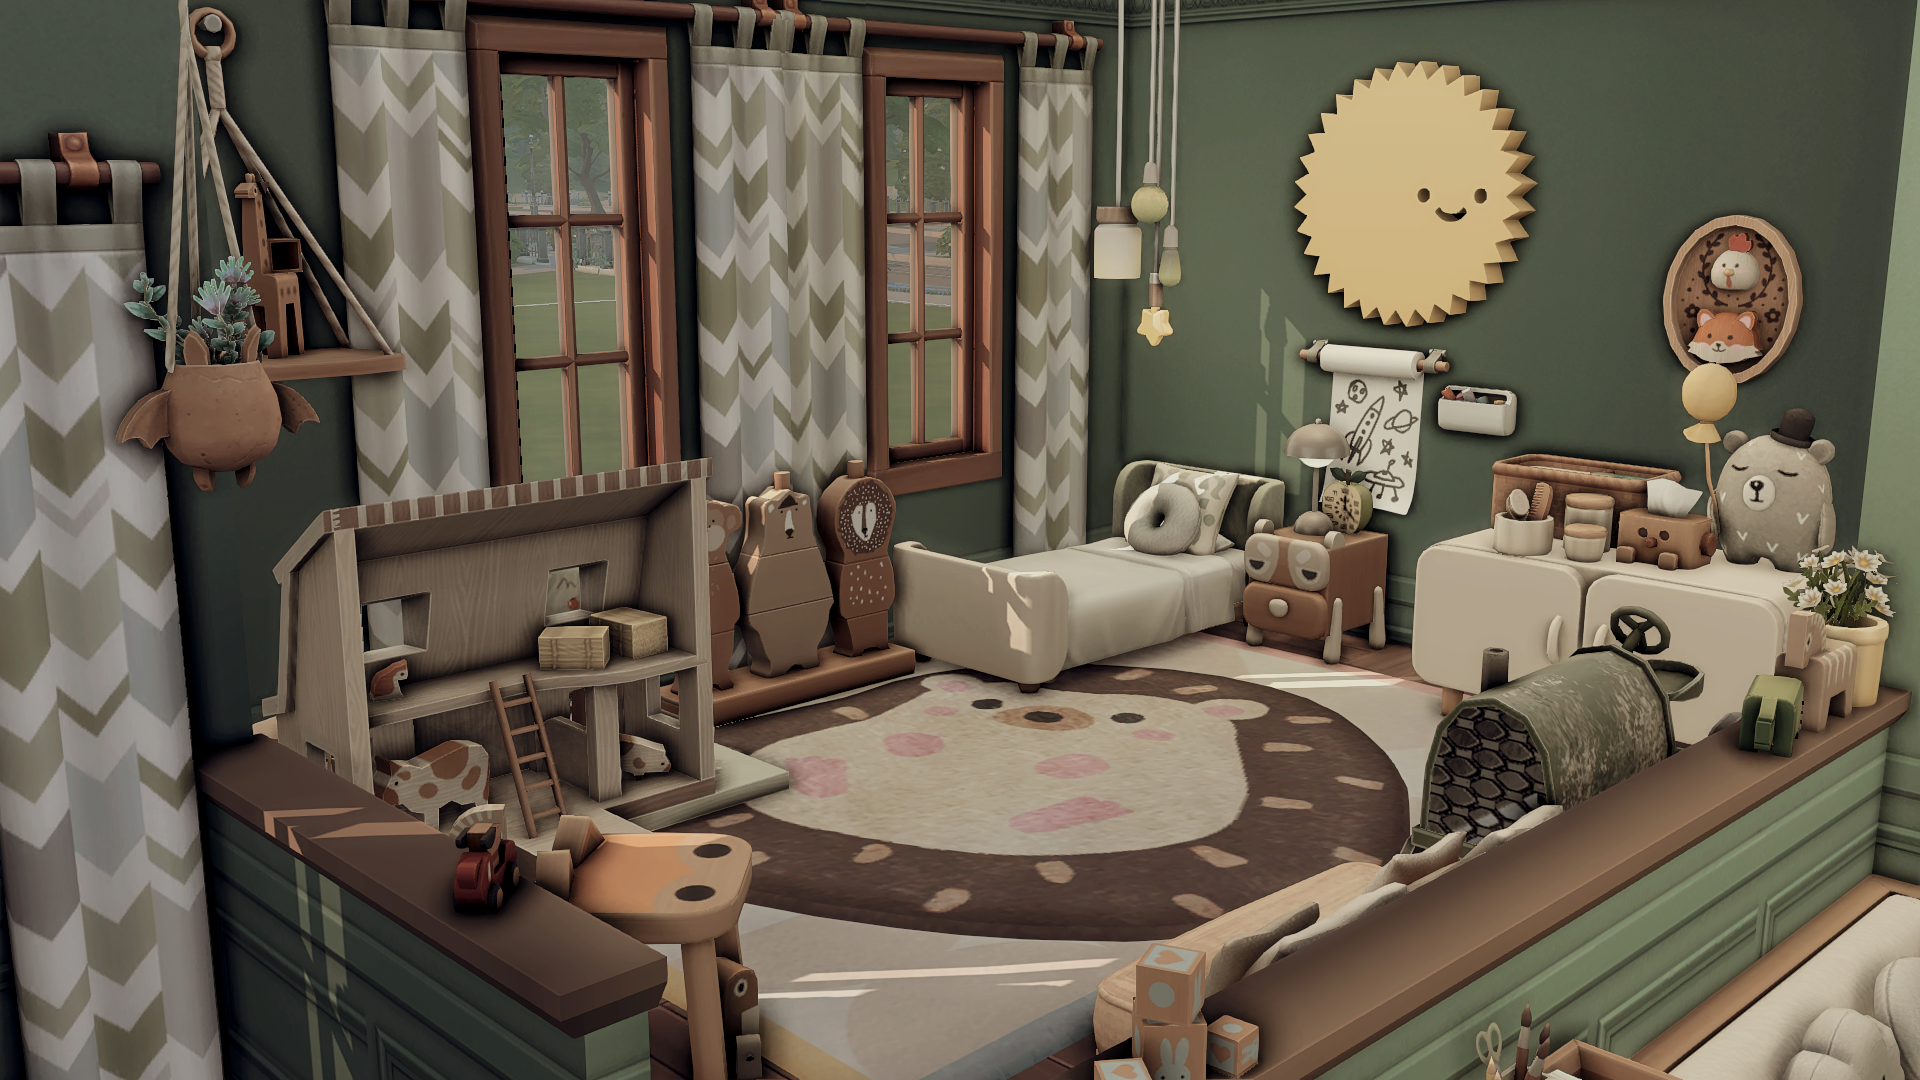 Download Boho Baby Bedroom CC Pack - The Sims 4 Mods - CurseForge